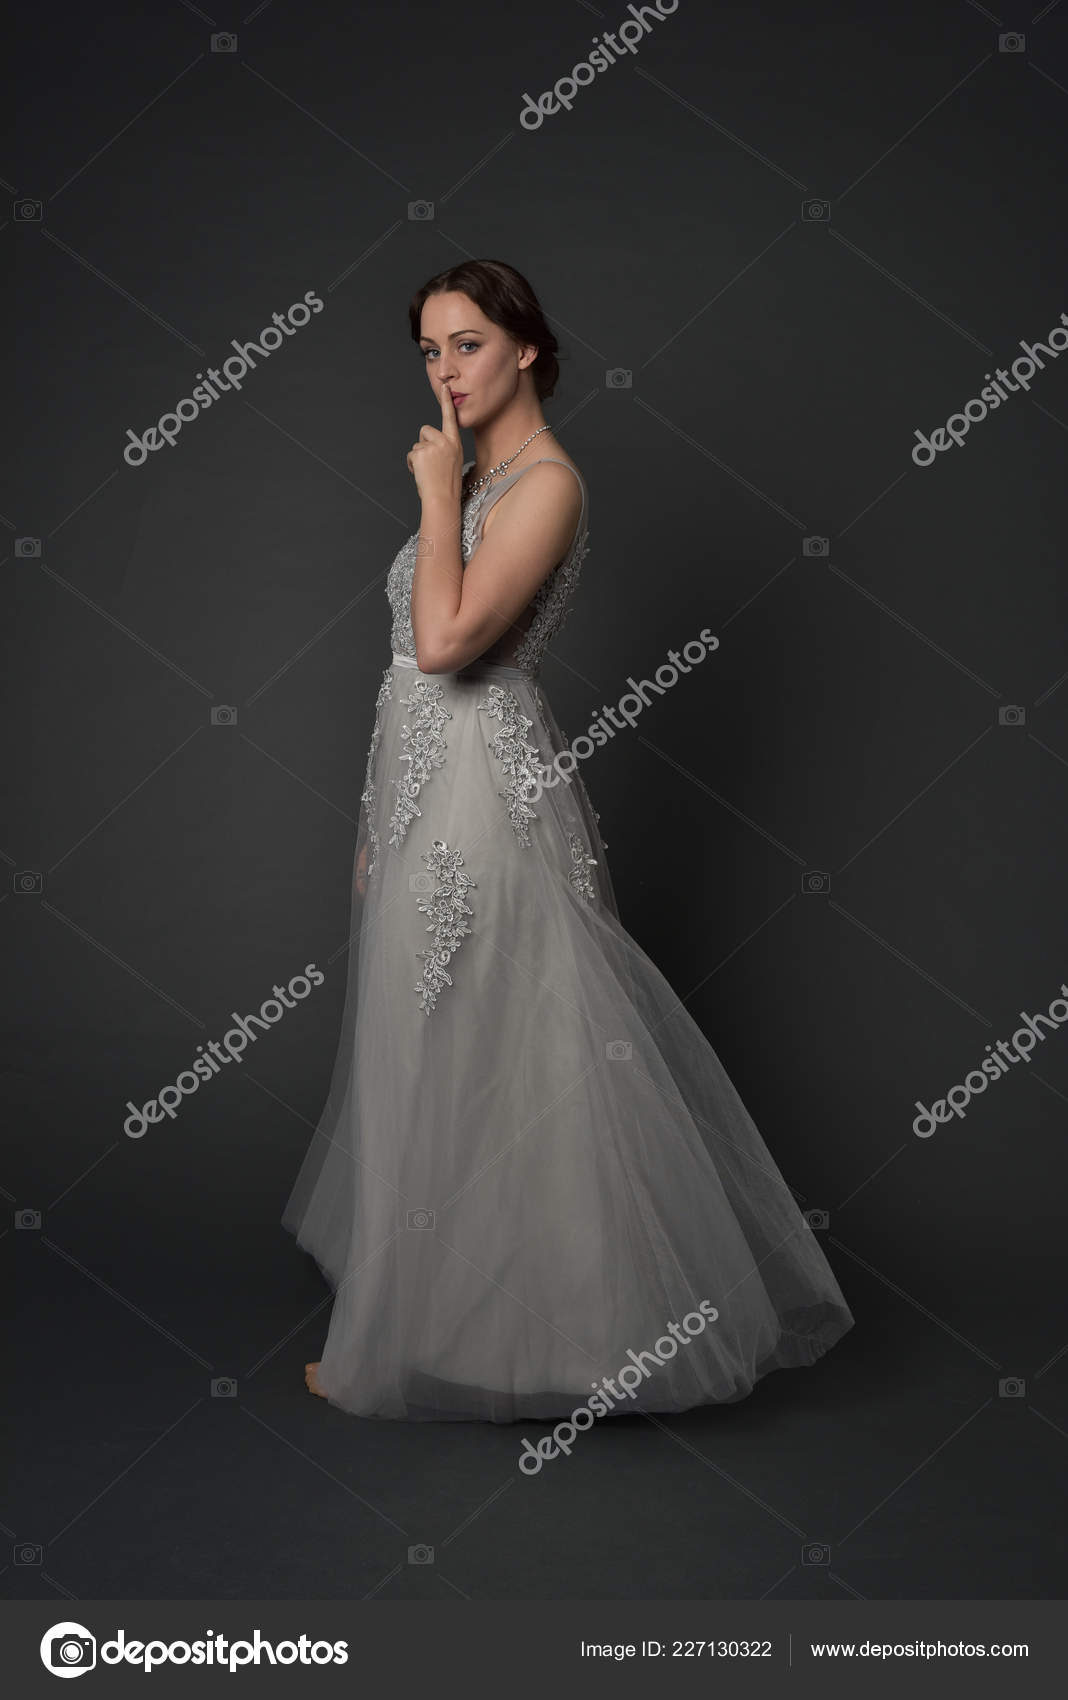 Evening gown Free Stock Photos, Images, and Pictures of Evening gown